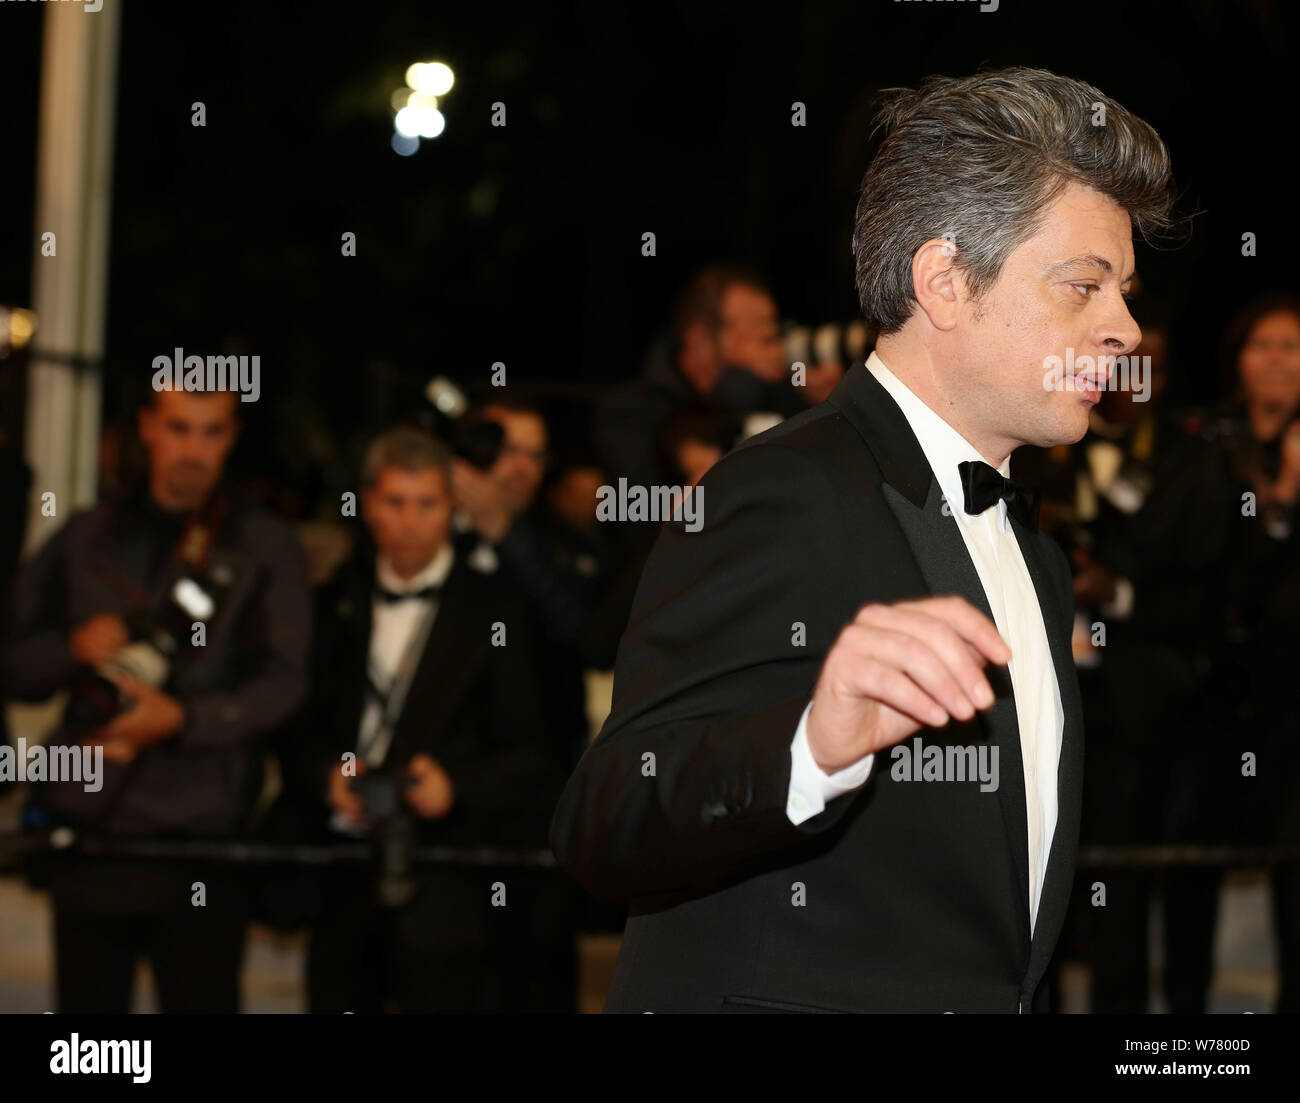 CANNES, FRANCE - MAY 19: Benjamin Biolet attends the Diego Maradona screening during the 72nd Cannes Film Festival (Mickael Chavet) Stock Photo